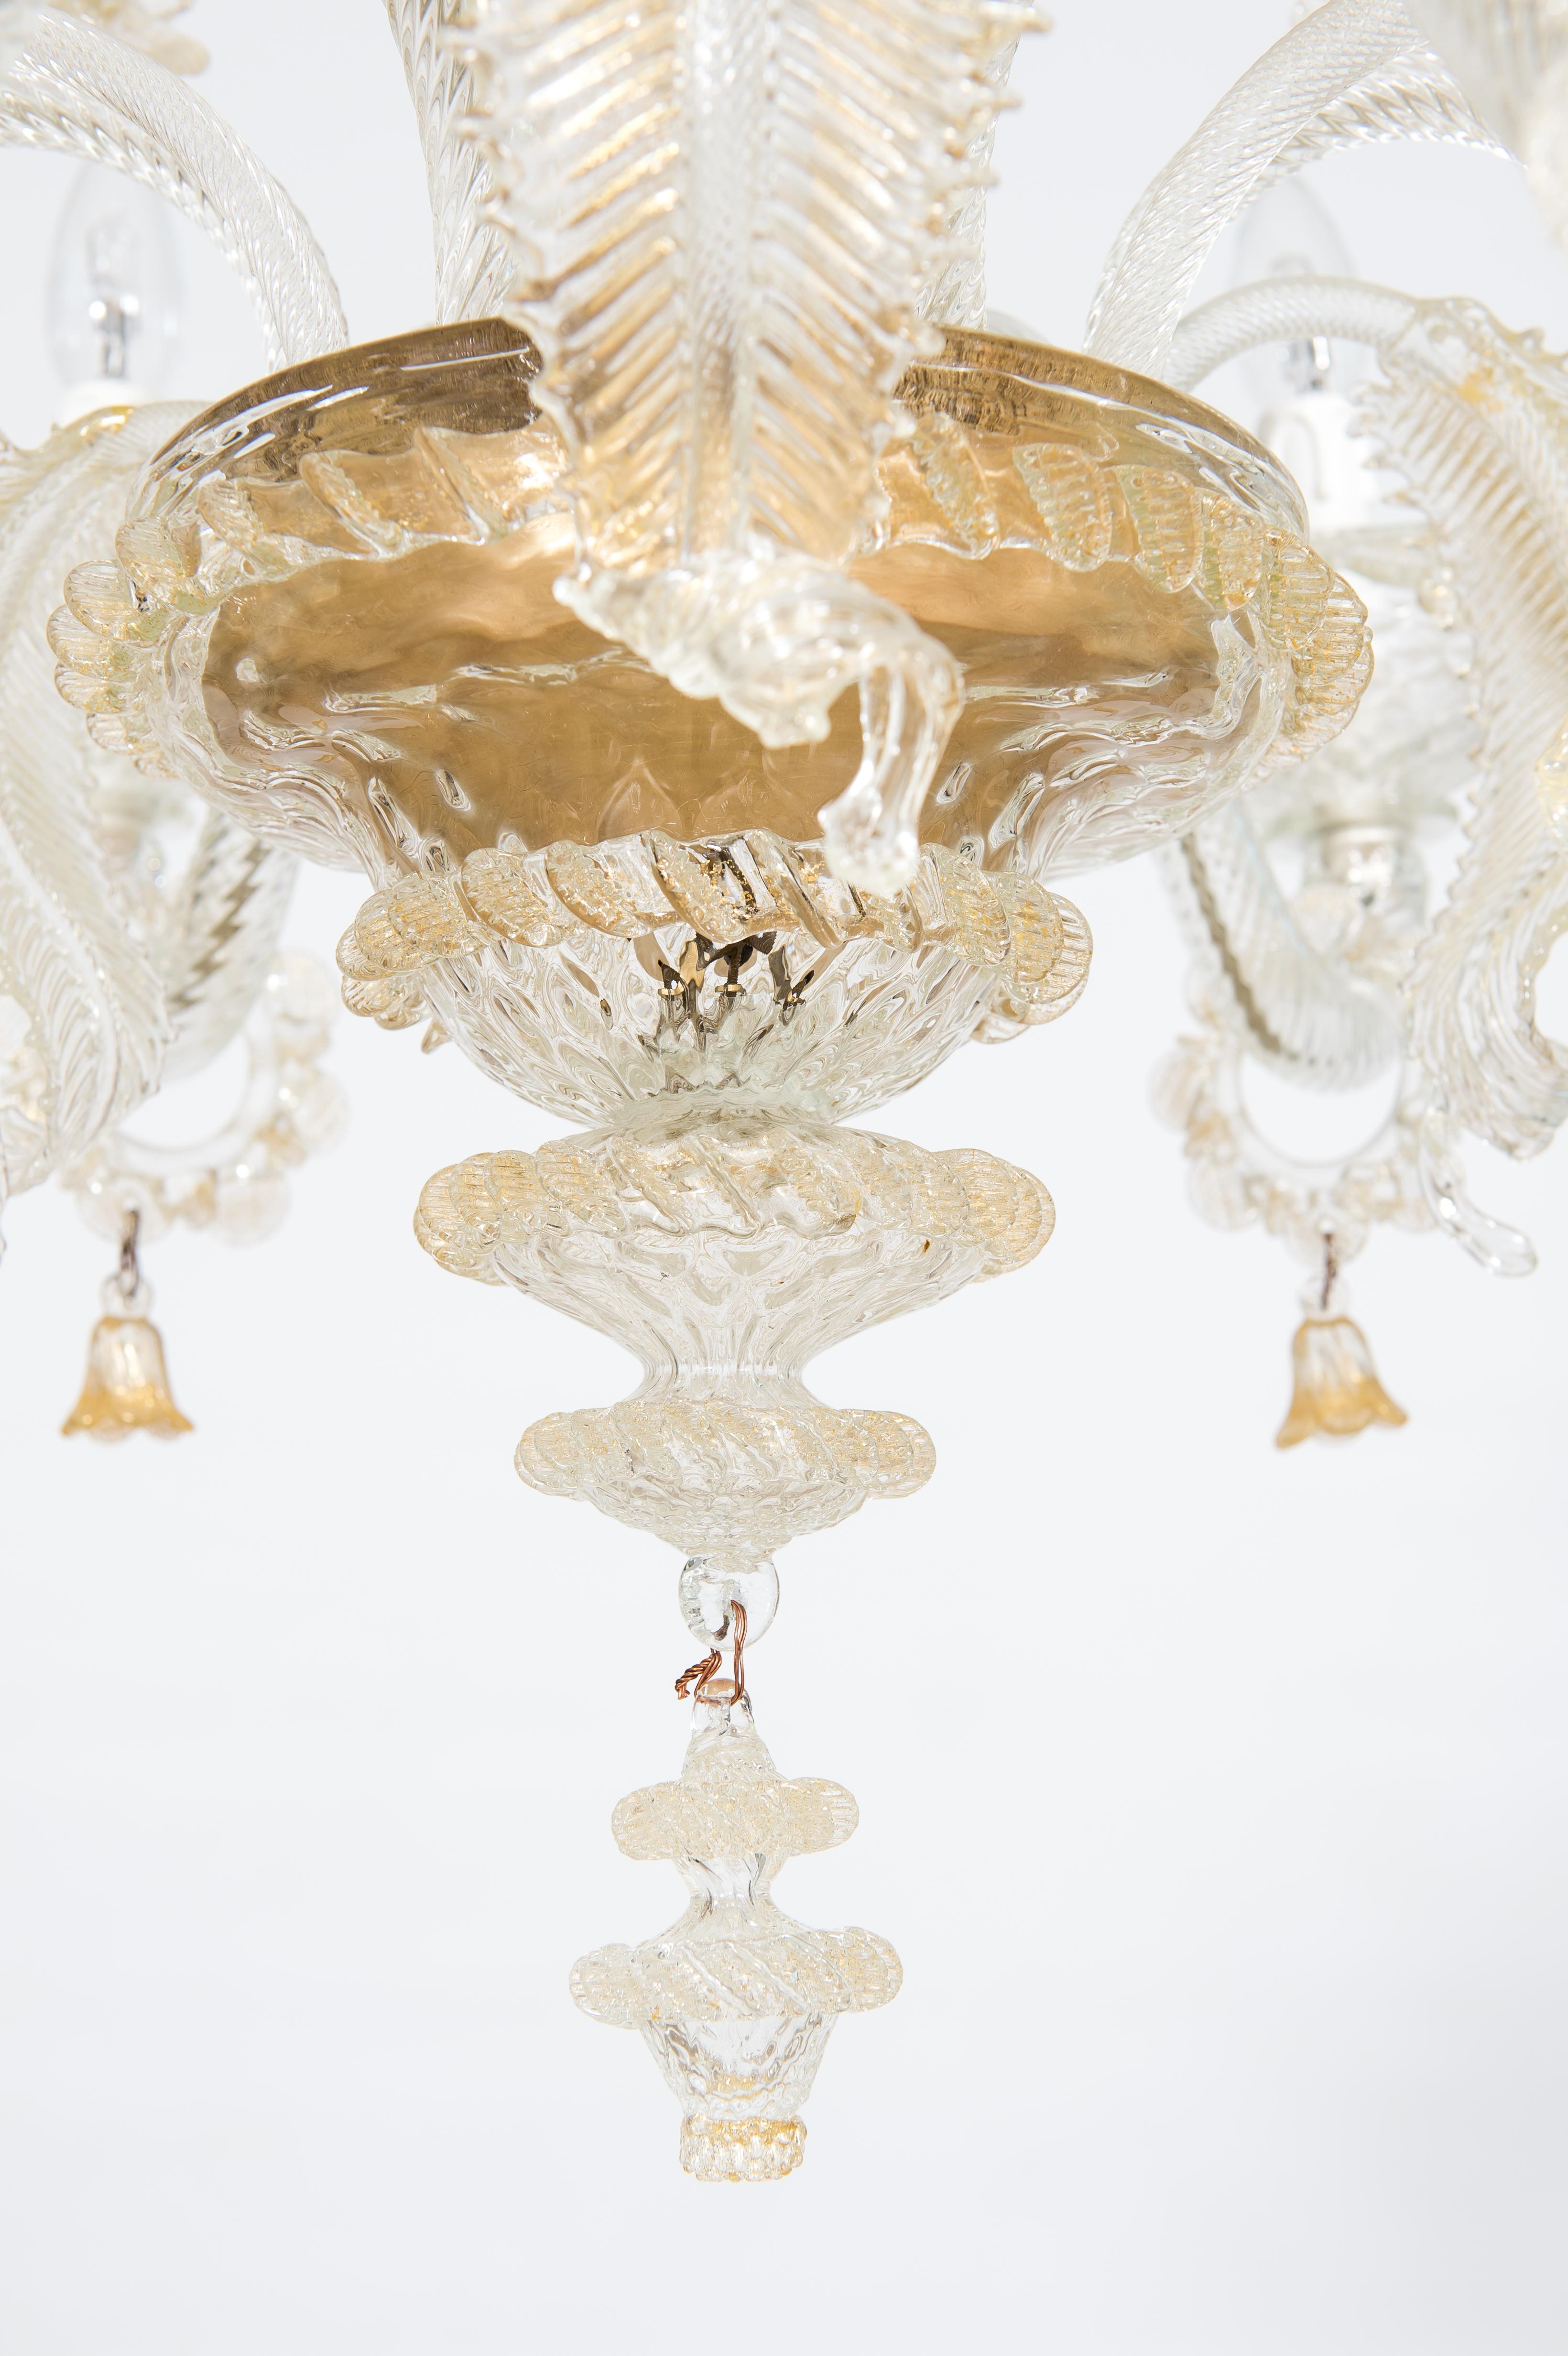 Floral Murano Glass Chandelier with “Riga Dritta” Decorations, 20th Century 4